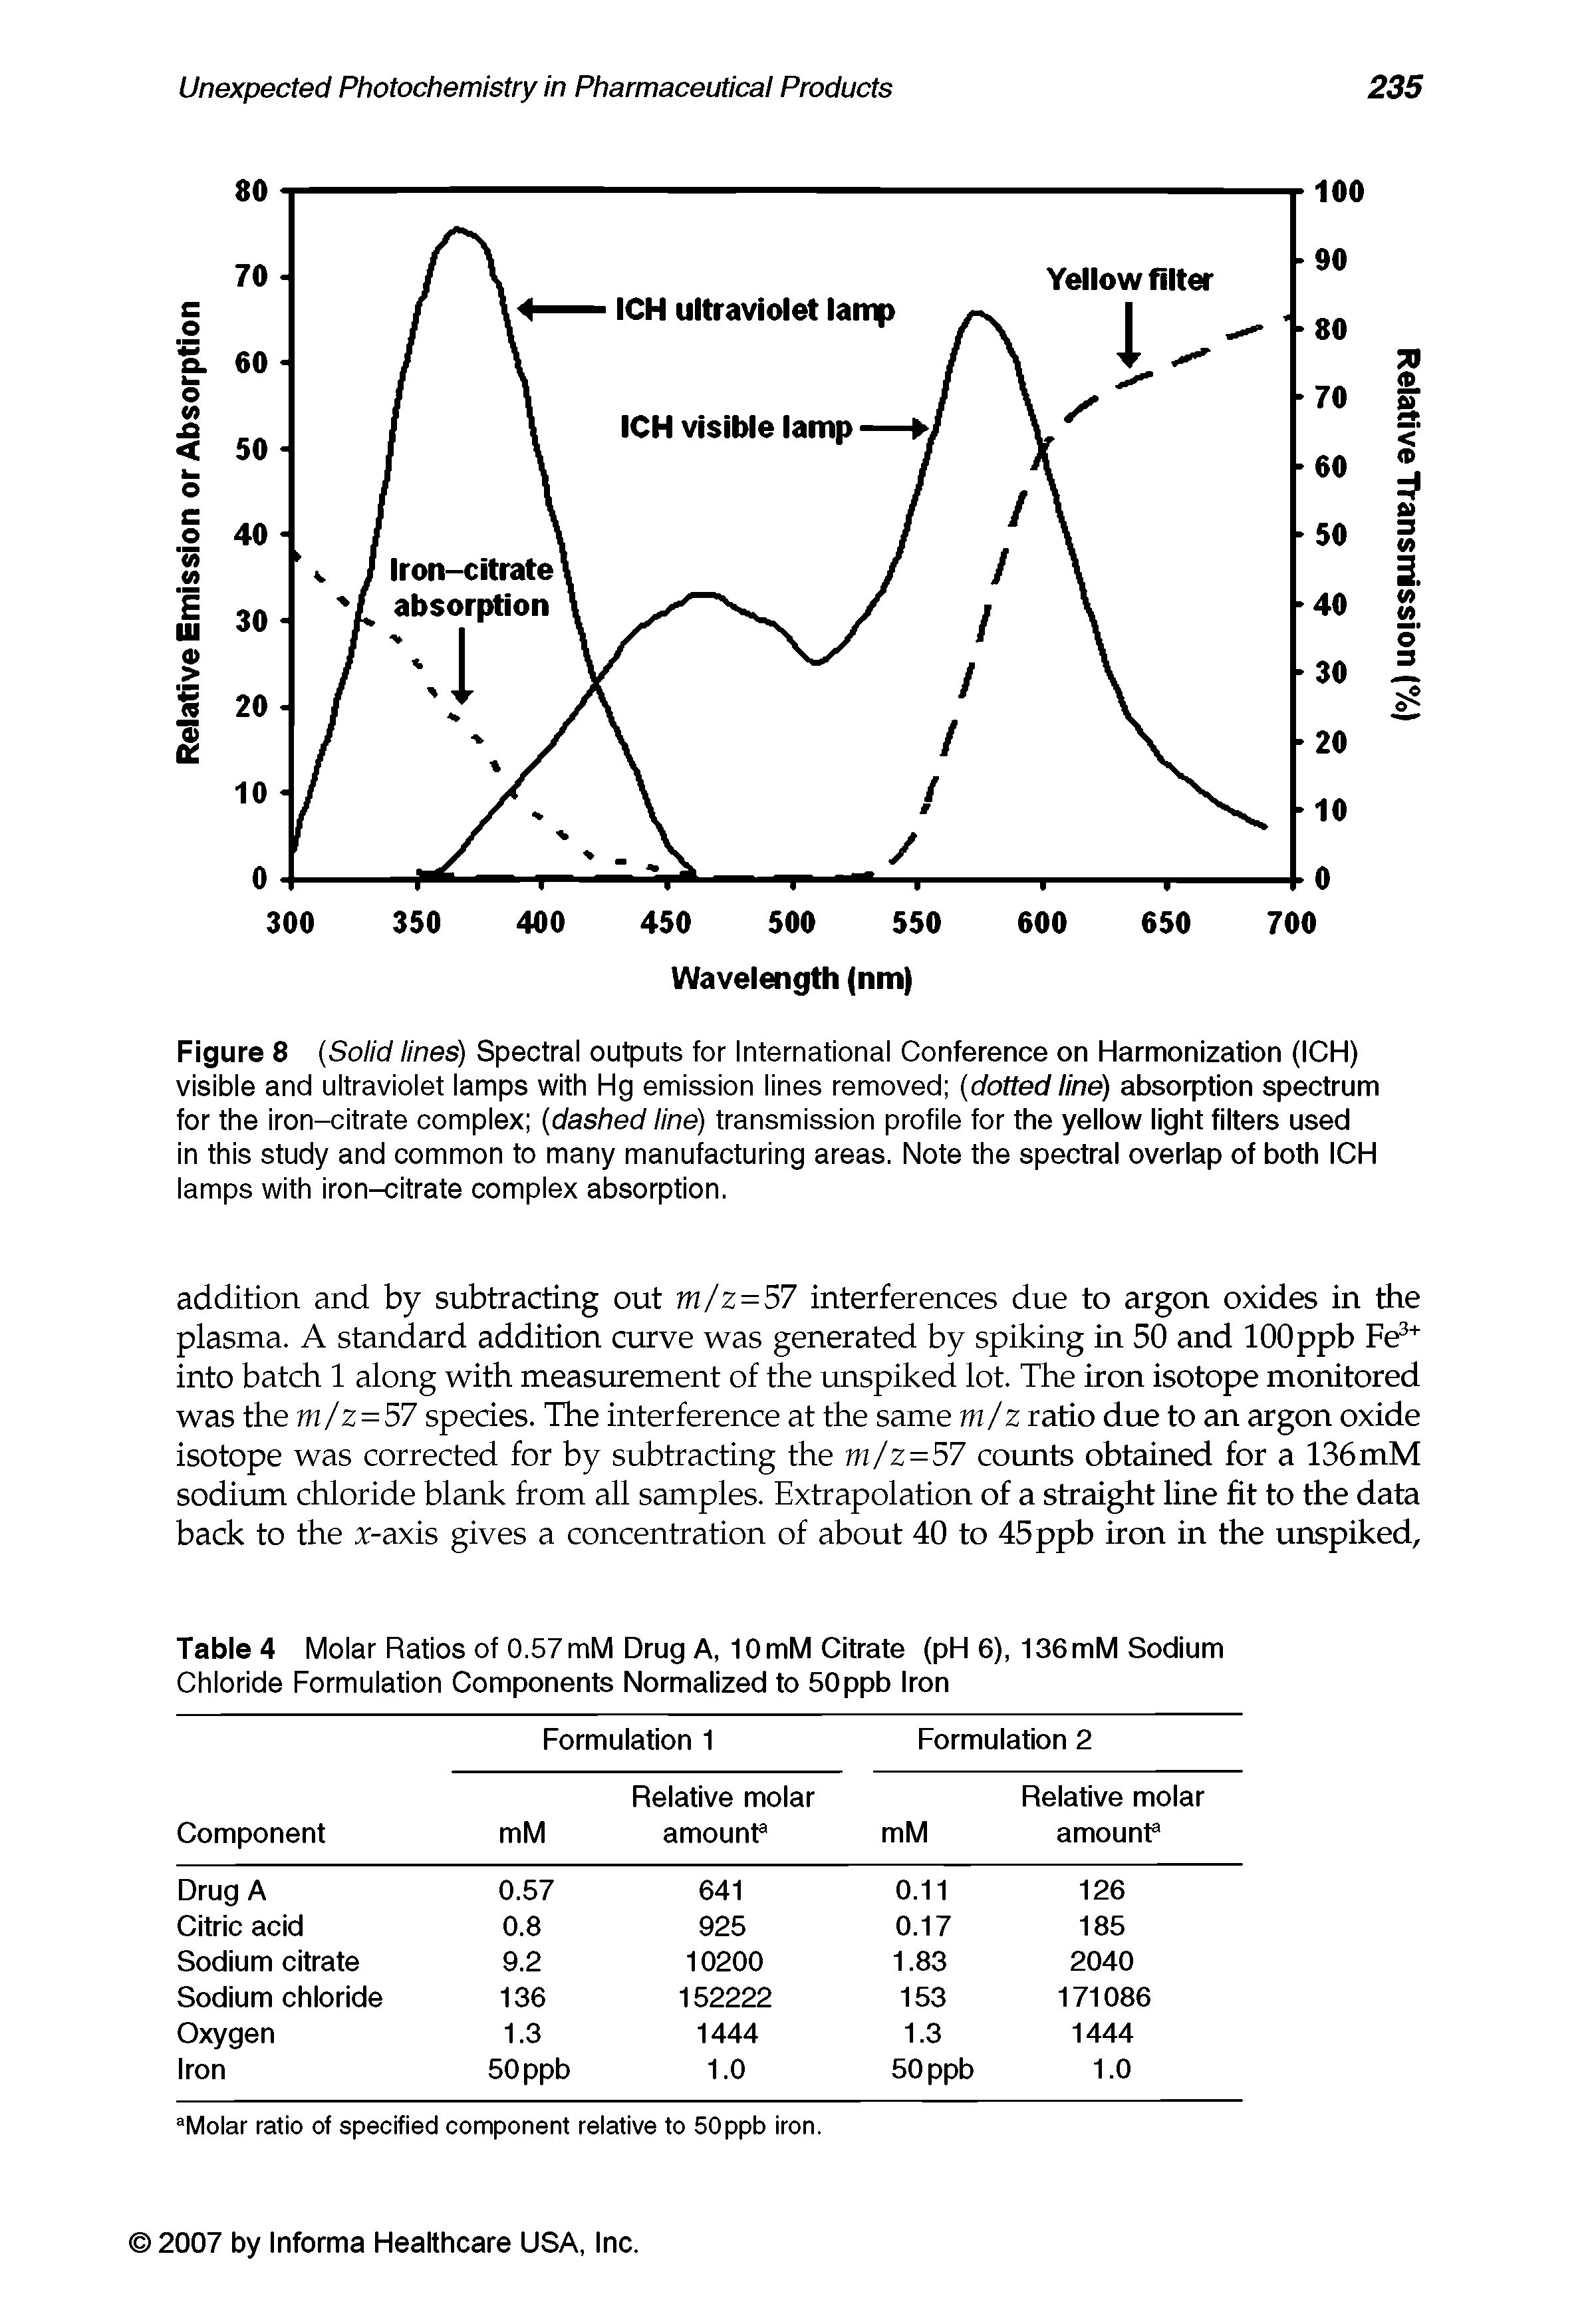 Figure 8 Solid lines) Spectral outputs for International Conference on Harmonization (ICH) visible and ultraviolet lamps with Hg emission lines removed dotted line) absorption spectrum for the iron-citrate complex dashed line) transmission profile for the yellow light filters used in this study and common to many manufacturing areas. Note the spectral overlap of both ICH lamps with iron-citrate complex absorption.